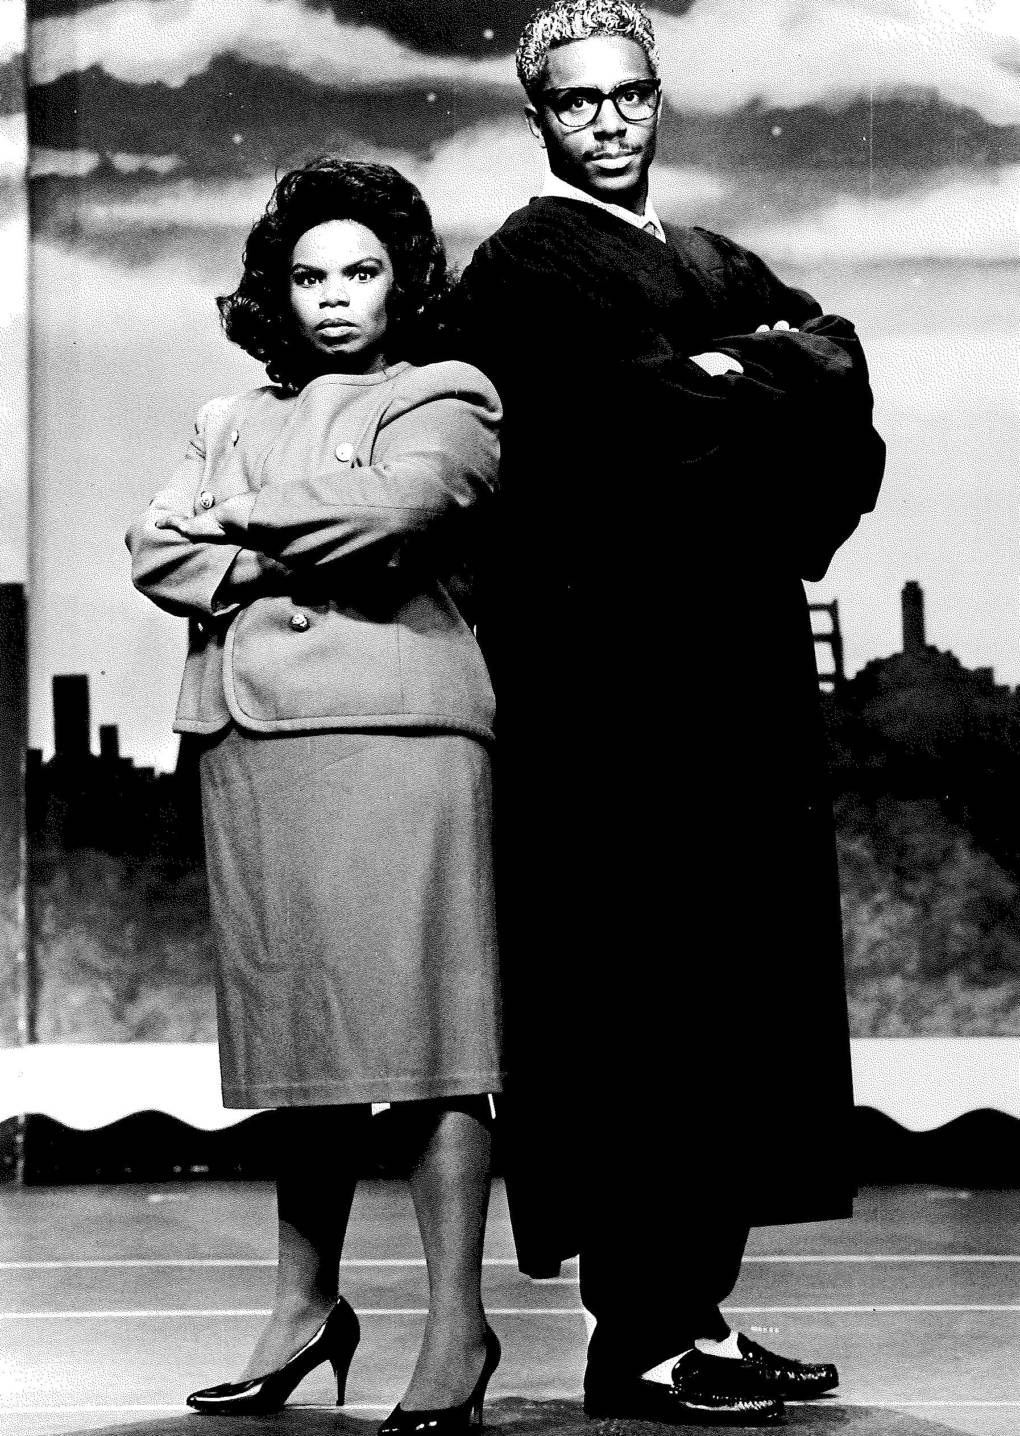 Renee Lubin (left) and Art Hervey (right) as Anita Hill and Clarence Thomas in Beach Blanket Babylon, 1991.